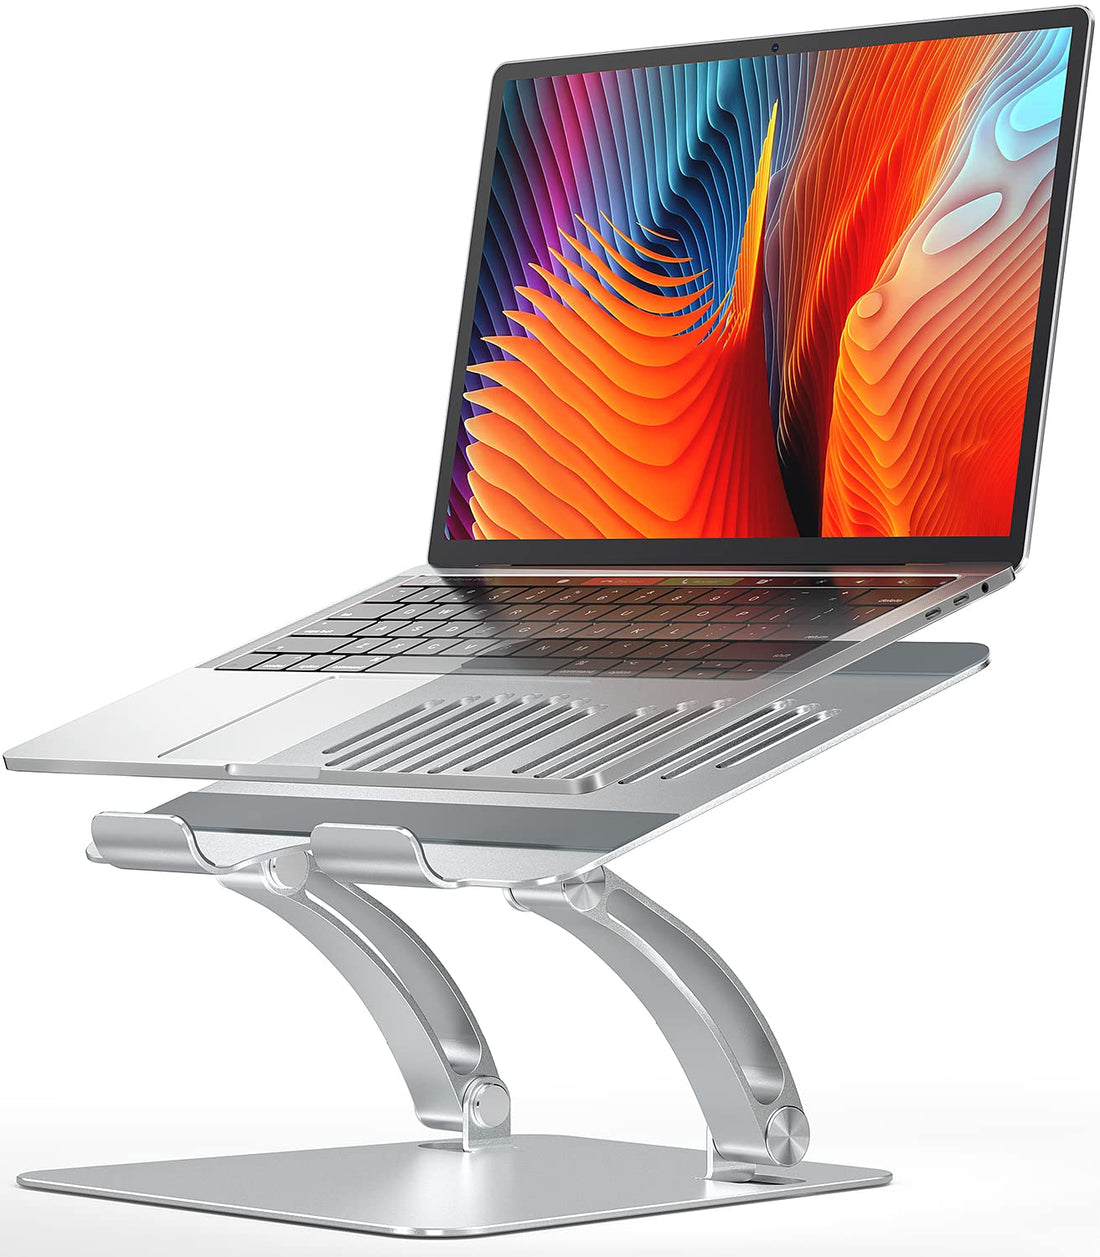 Adjustable Laptop Stand for Desk, Nulaxy Ergonomic Portable Laptop Stand Up to 10.6" with Heat-Vent , Laptop Riser Supports Upto 11Lbs, Compatible with MacBook Pro All Laptops 11-16"(Silver)